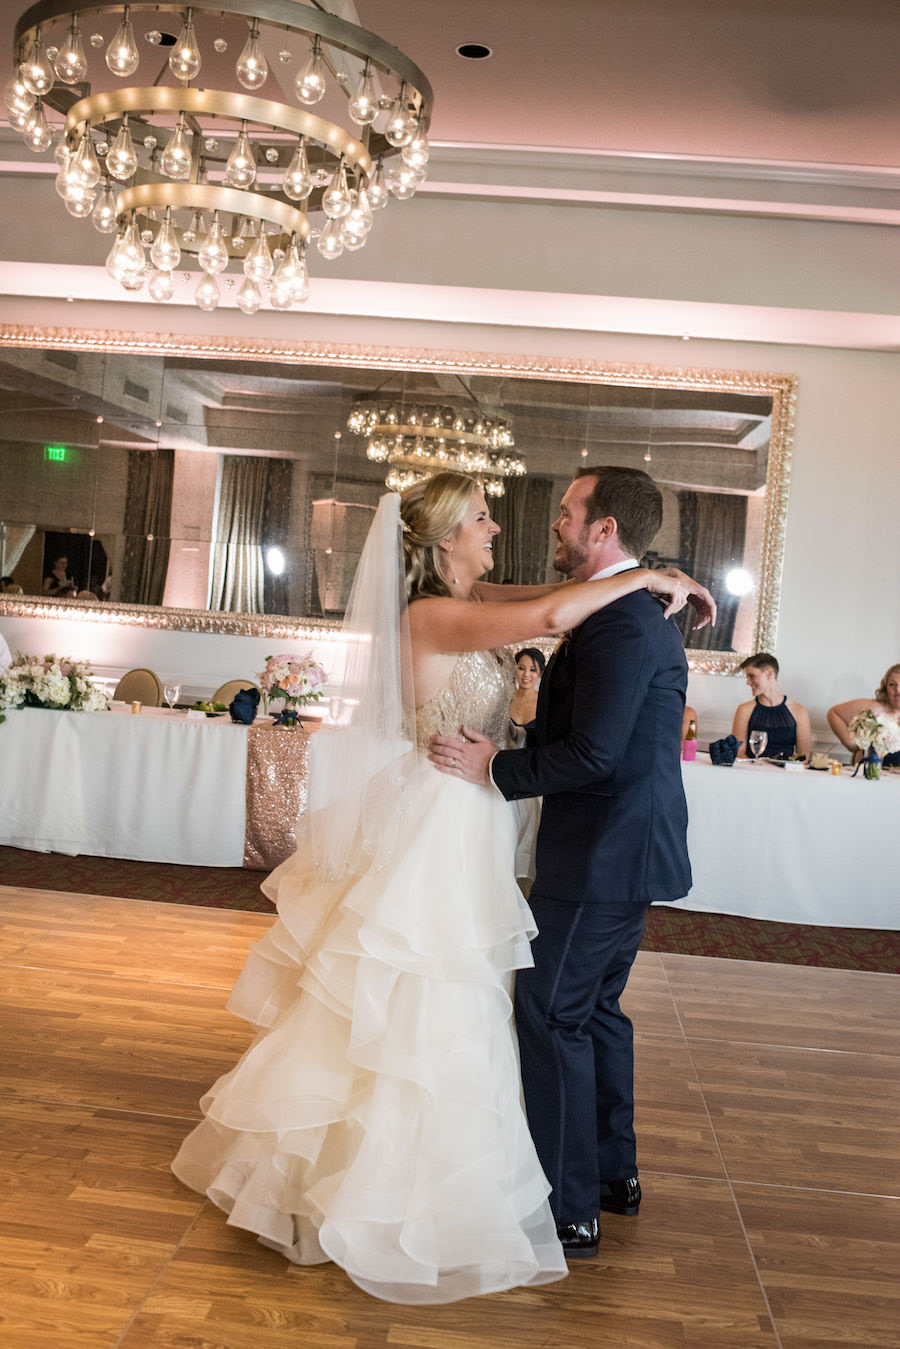 First Dance Portrait with Voluminous Layered Ball Gown Wedding Dress and Elegant Long Table at Downtown St Petersburg Reception Venue The Birchwood | Tampa Bay Wedding Planner Special Moments Event Planning